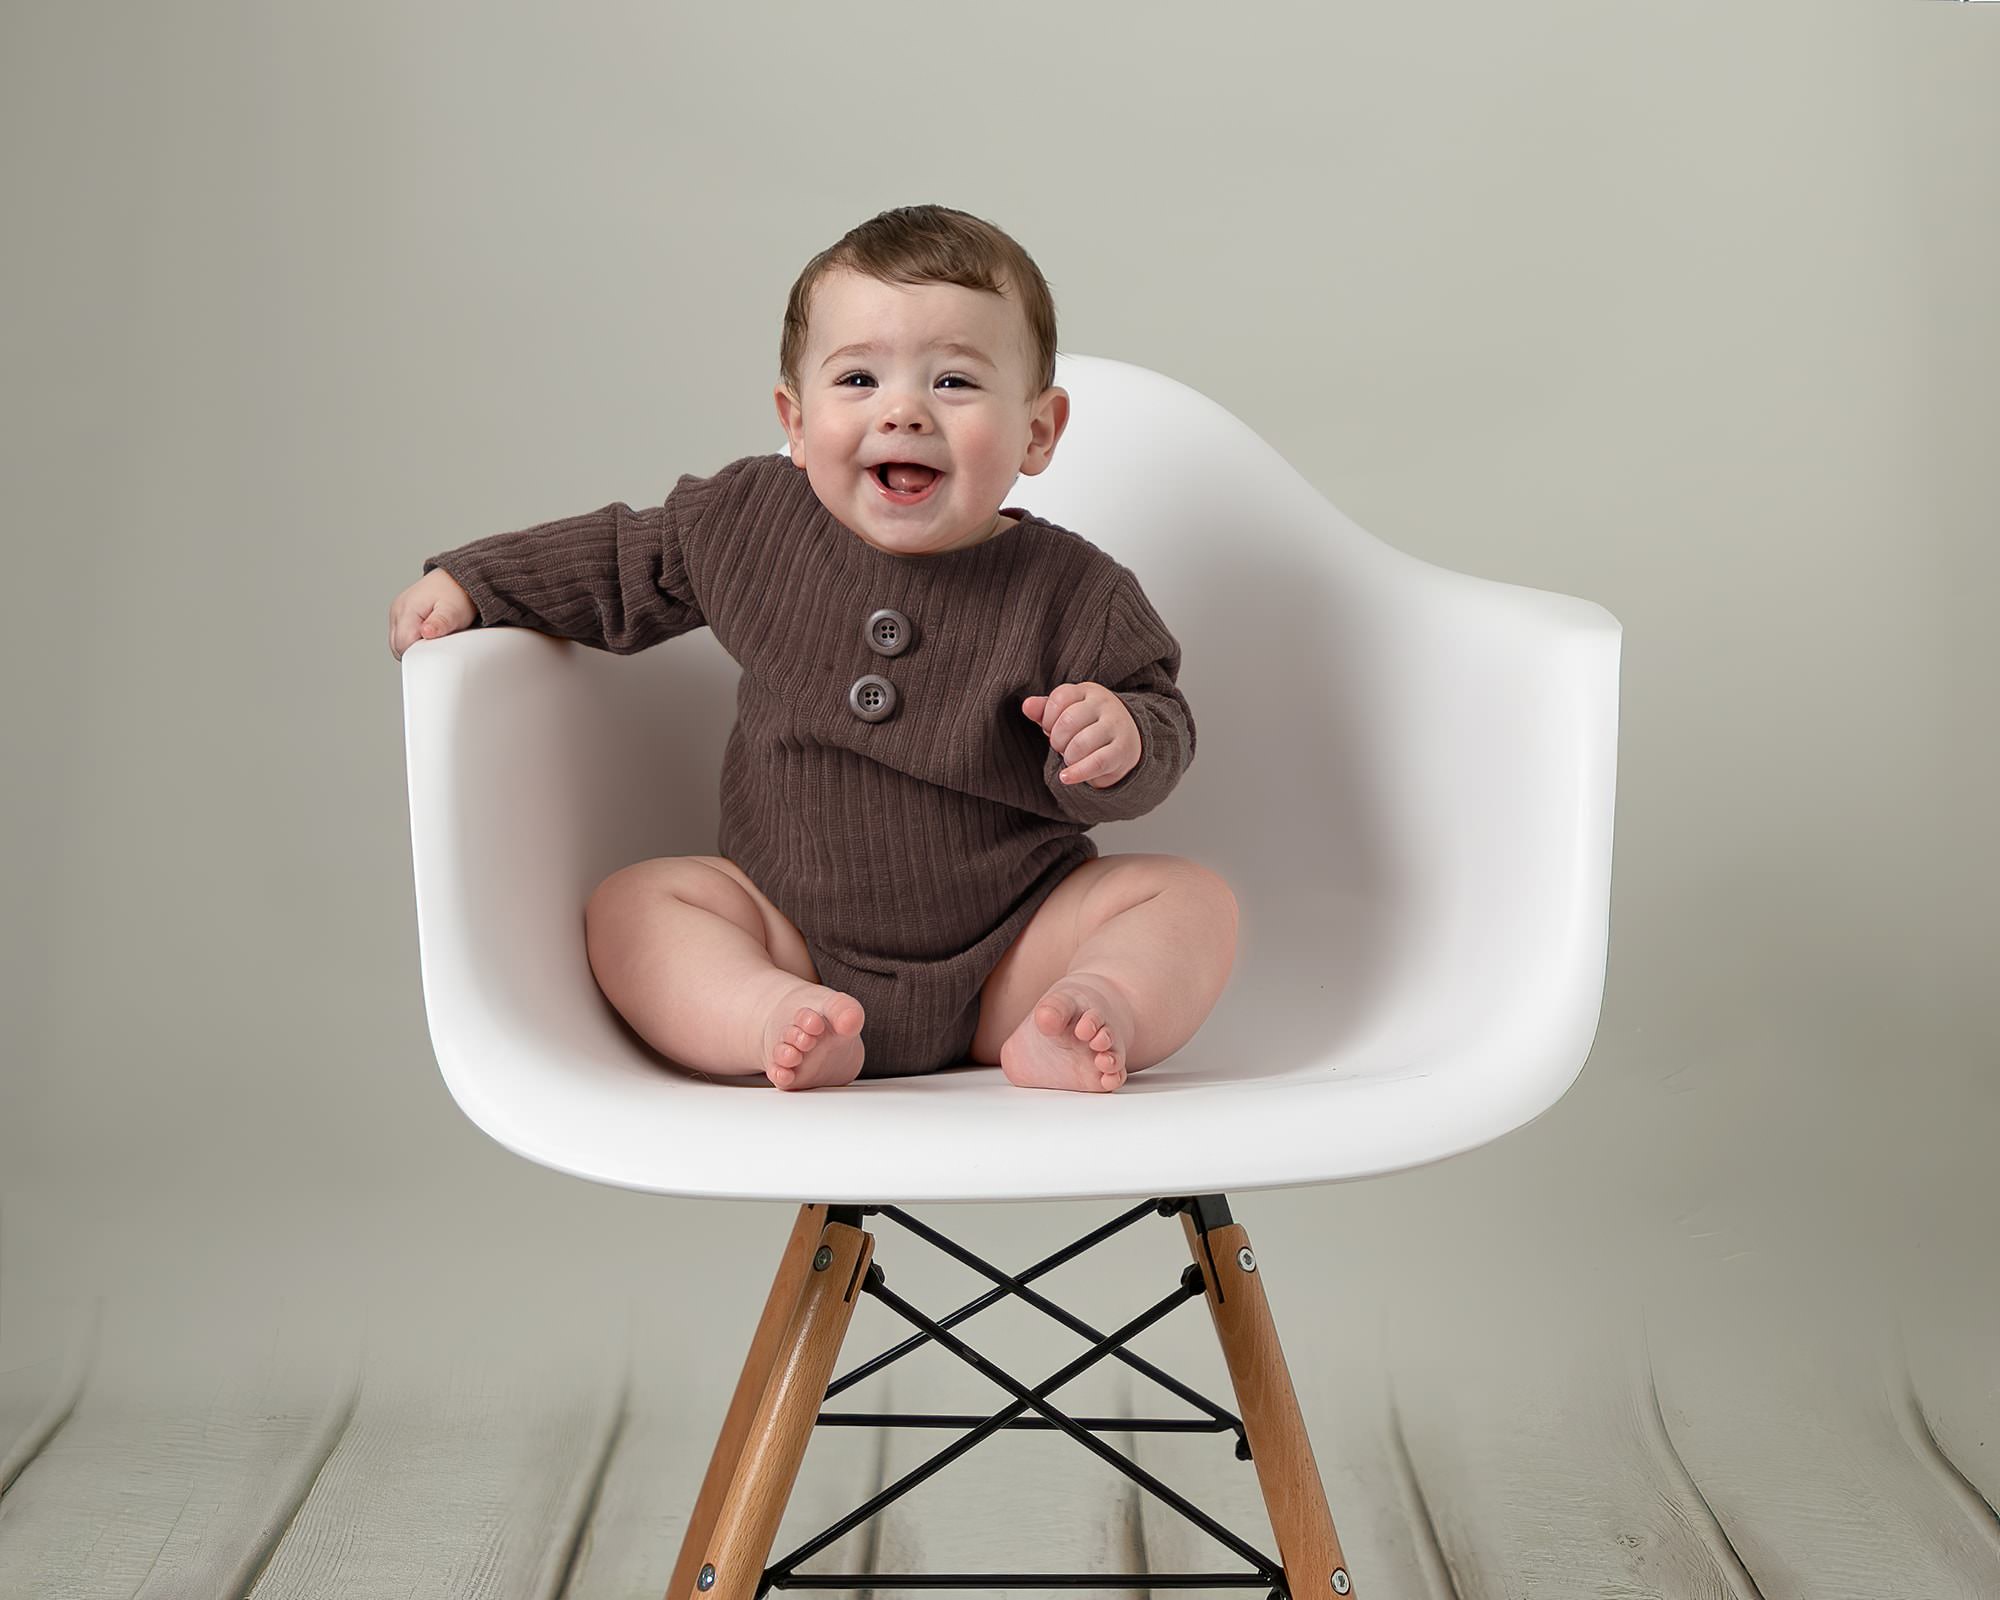 Baby boy sat on a white chair laughing. Boy is wearing a brown romper. Part of a gallery by Glasgow Baby Photographer